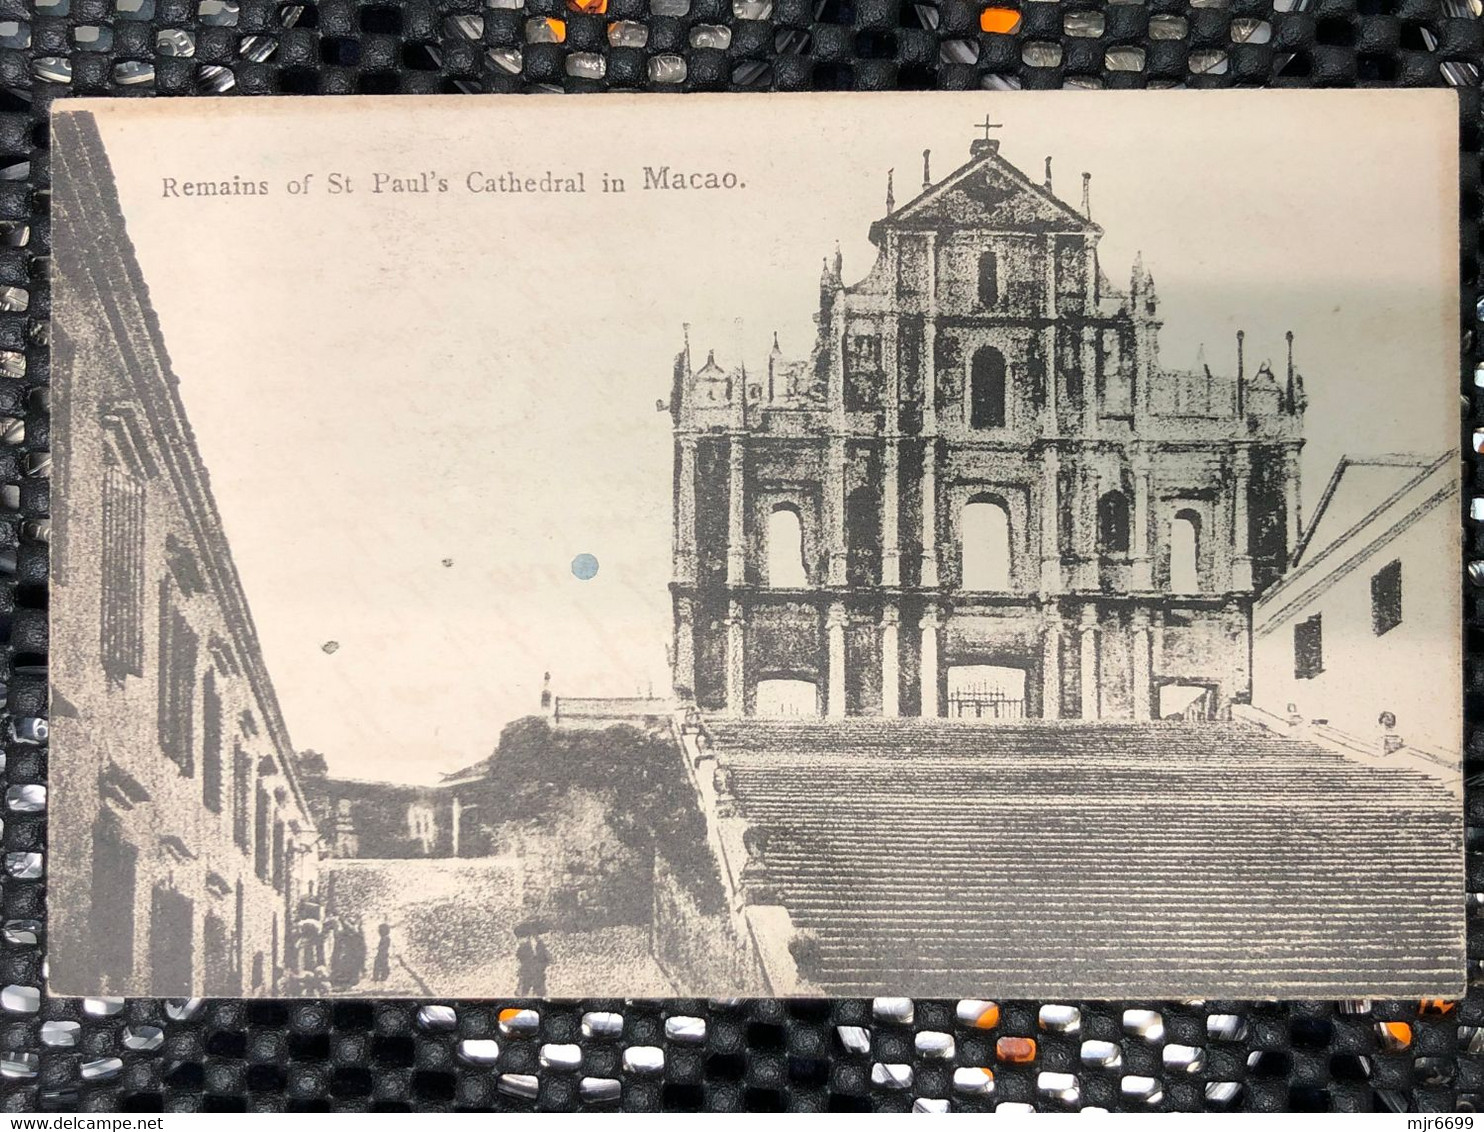 MACAU 1900'S PICTURE POST CARD WITH VIEW OF RUINS OF ST PAUL'S CHURCH/CATHEDRAL - Macao